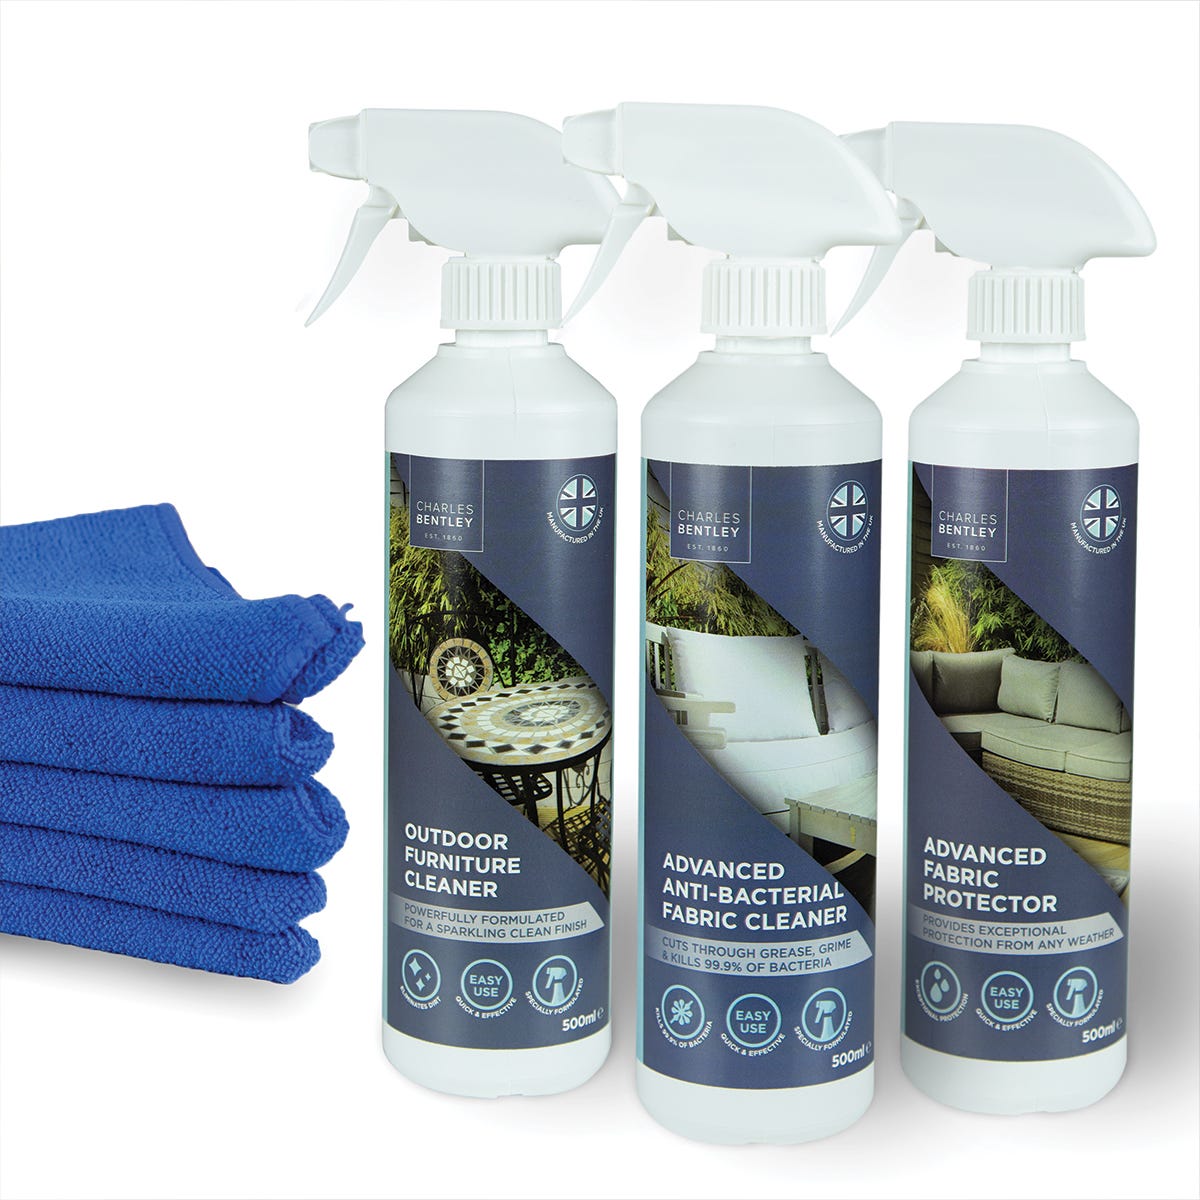 Charles Bentley Outdoor Furniture Cleaner Fabric Cleaner And Protector With Microfiber Cloths